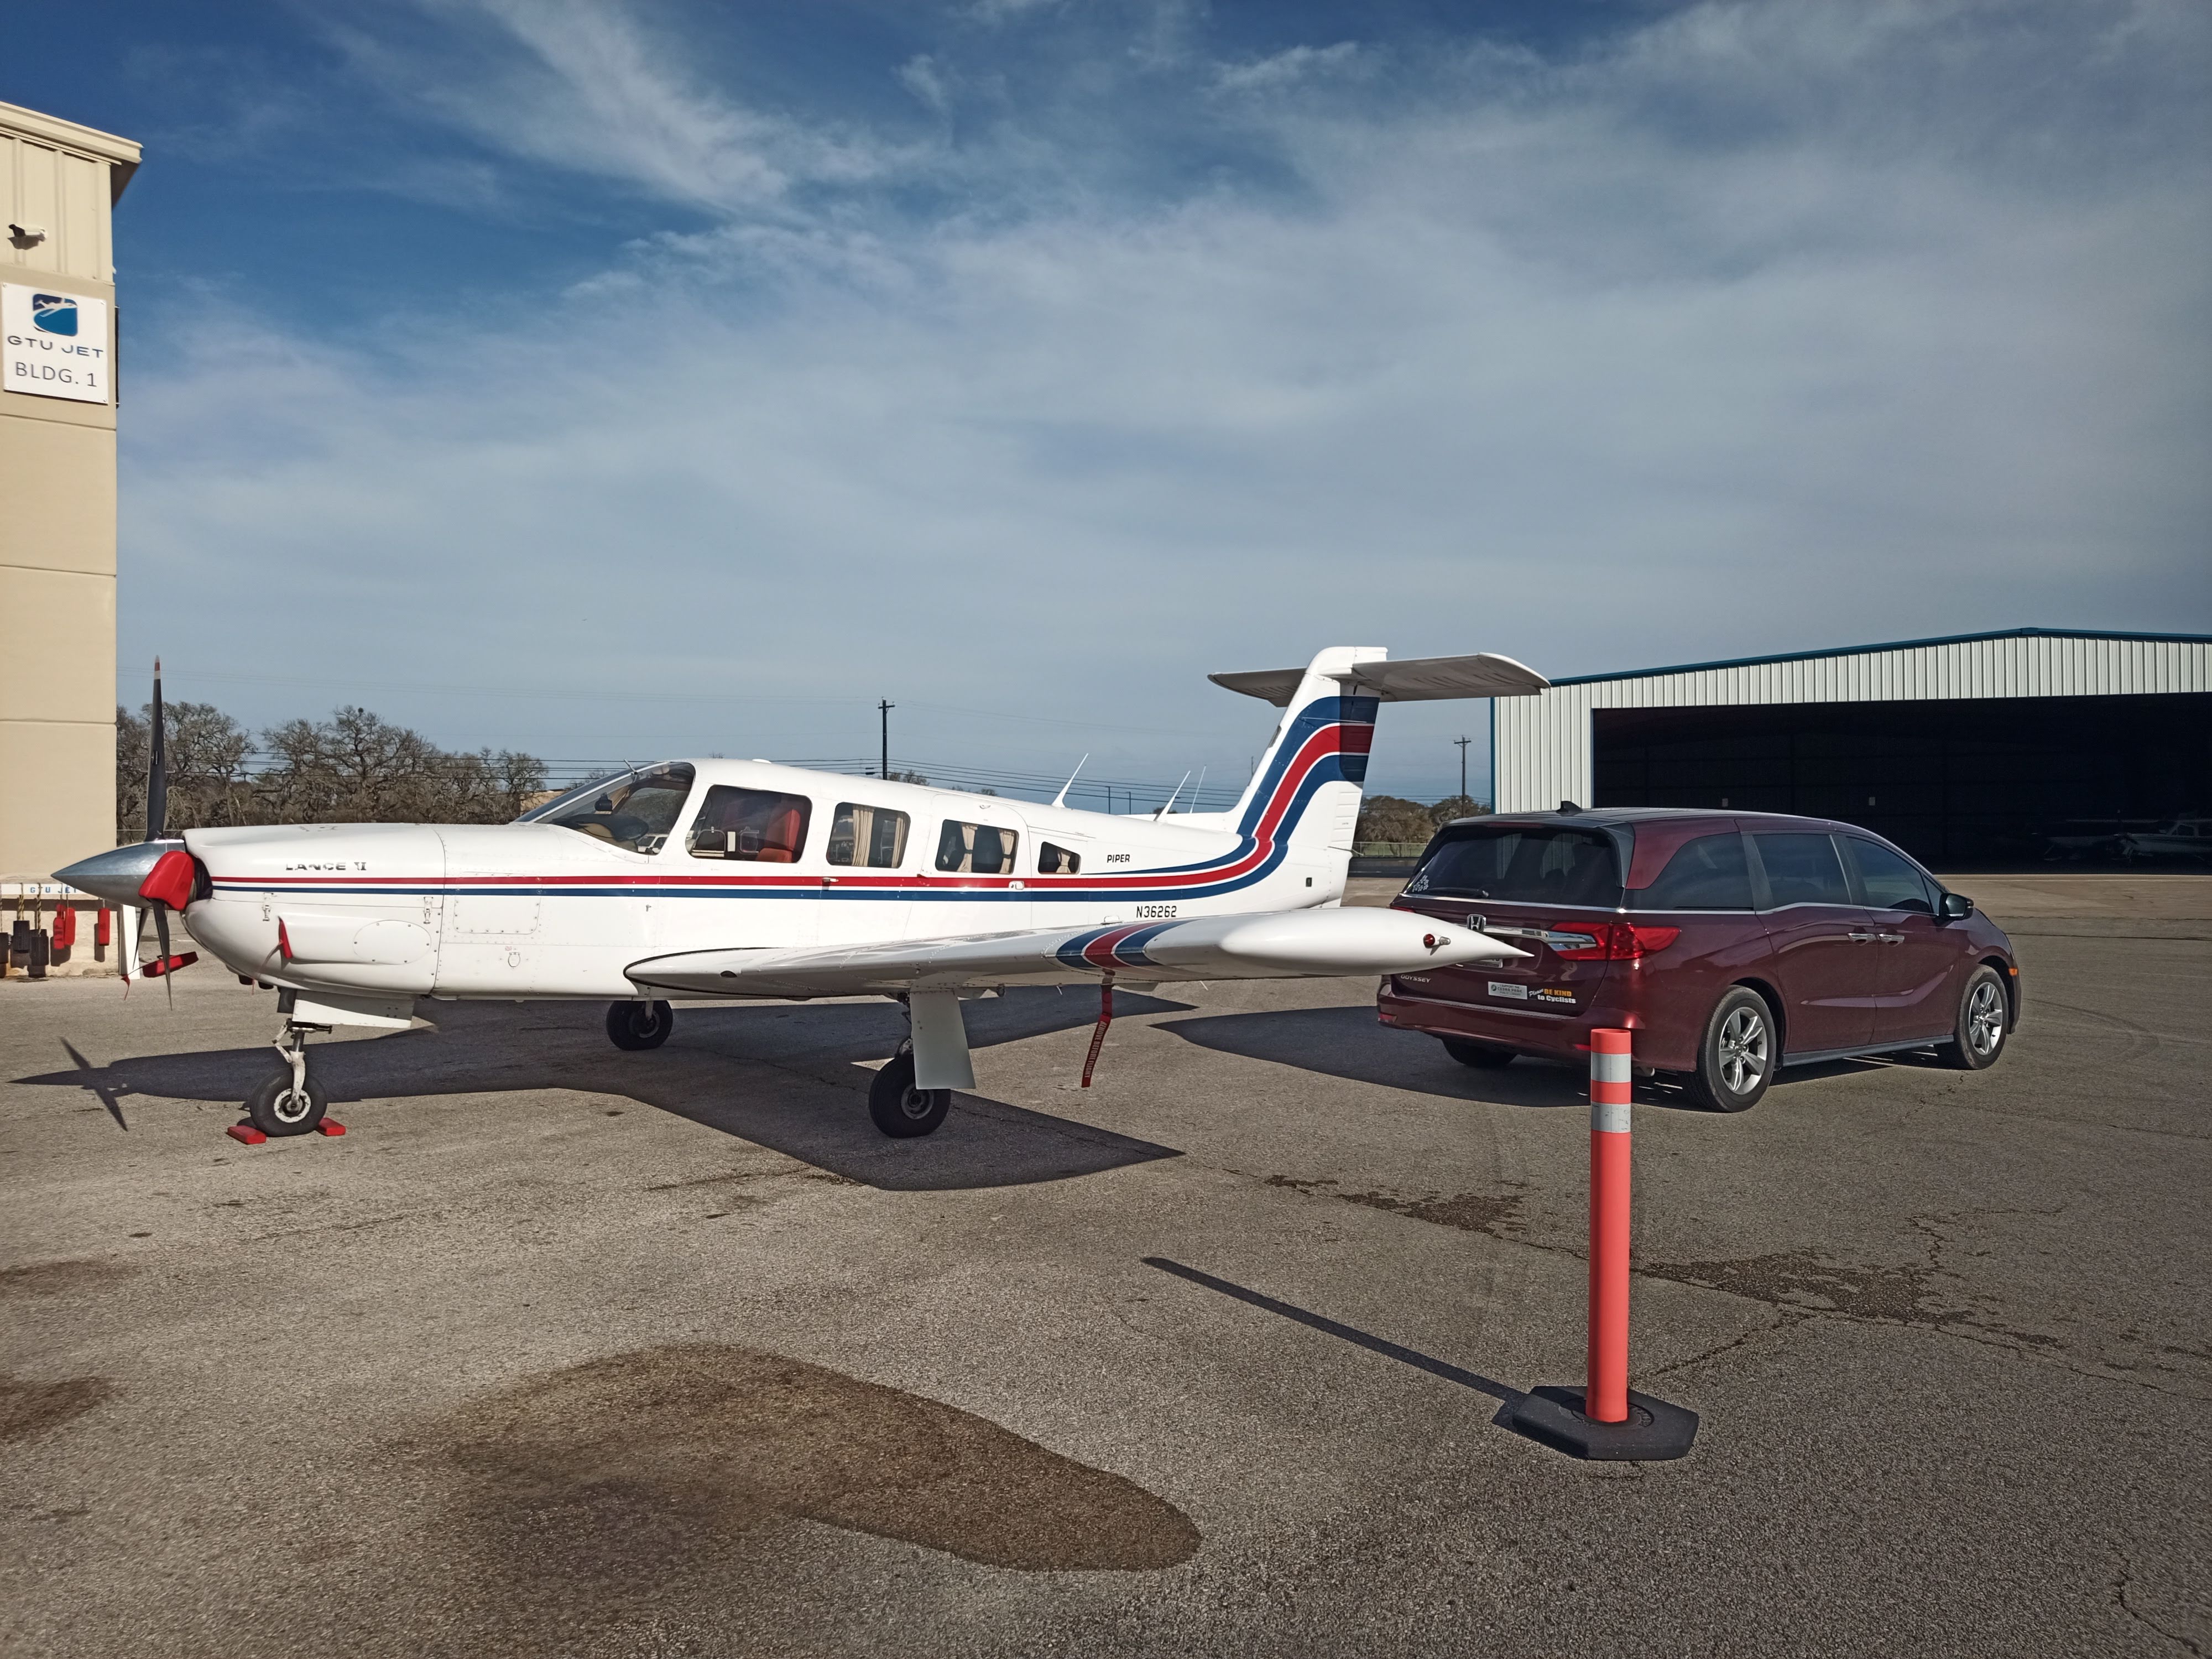 The Piper Lance II is basically a flying minivan. It gets unloaded into a regular non-flying minivan.